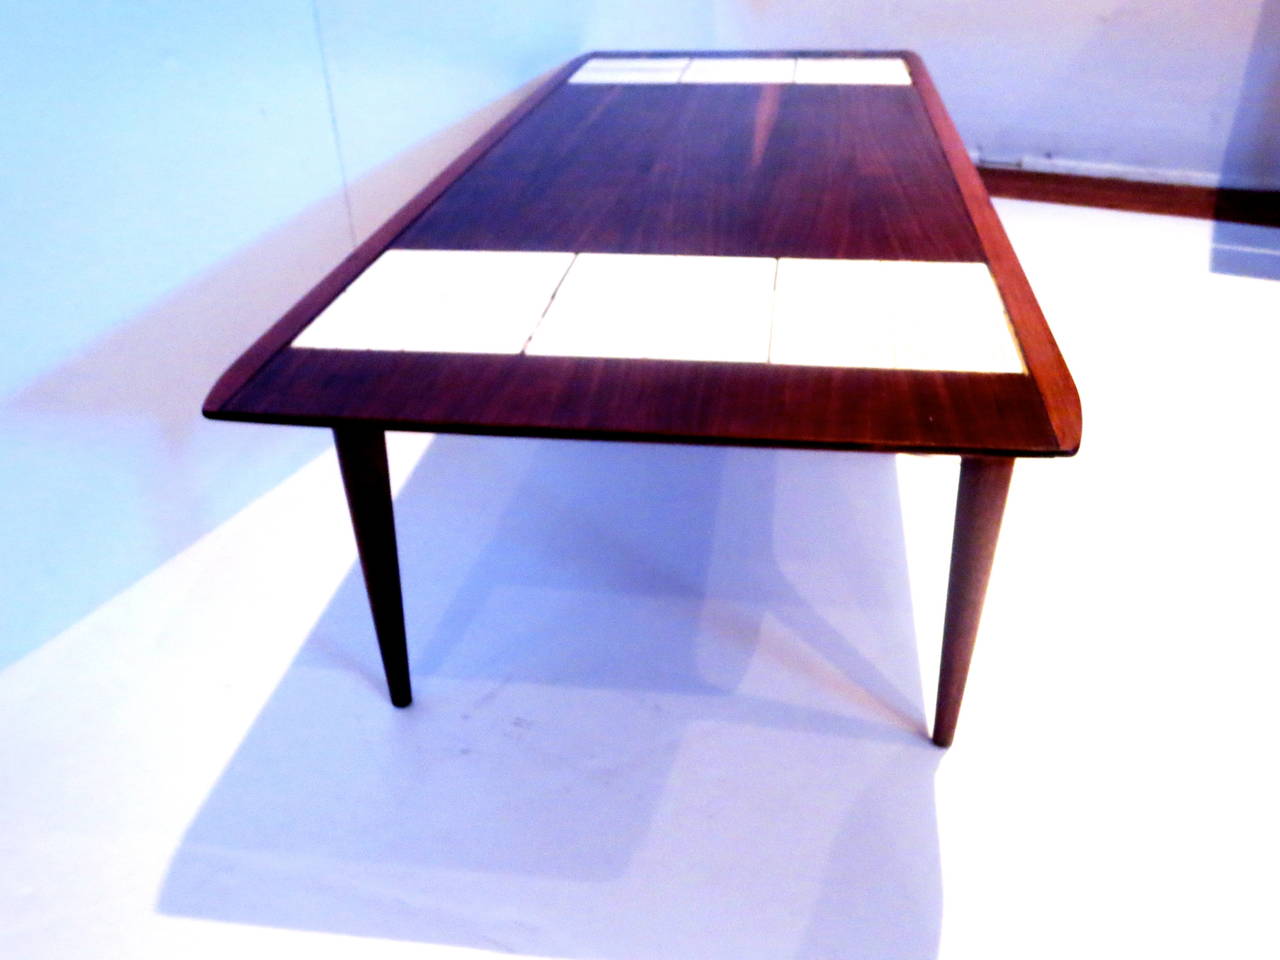 20th Century 1950s American Modern Walnut Coffee Table with Insert Tile Atomic Design